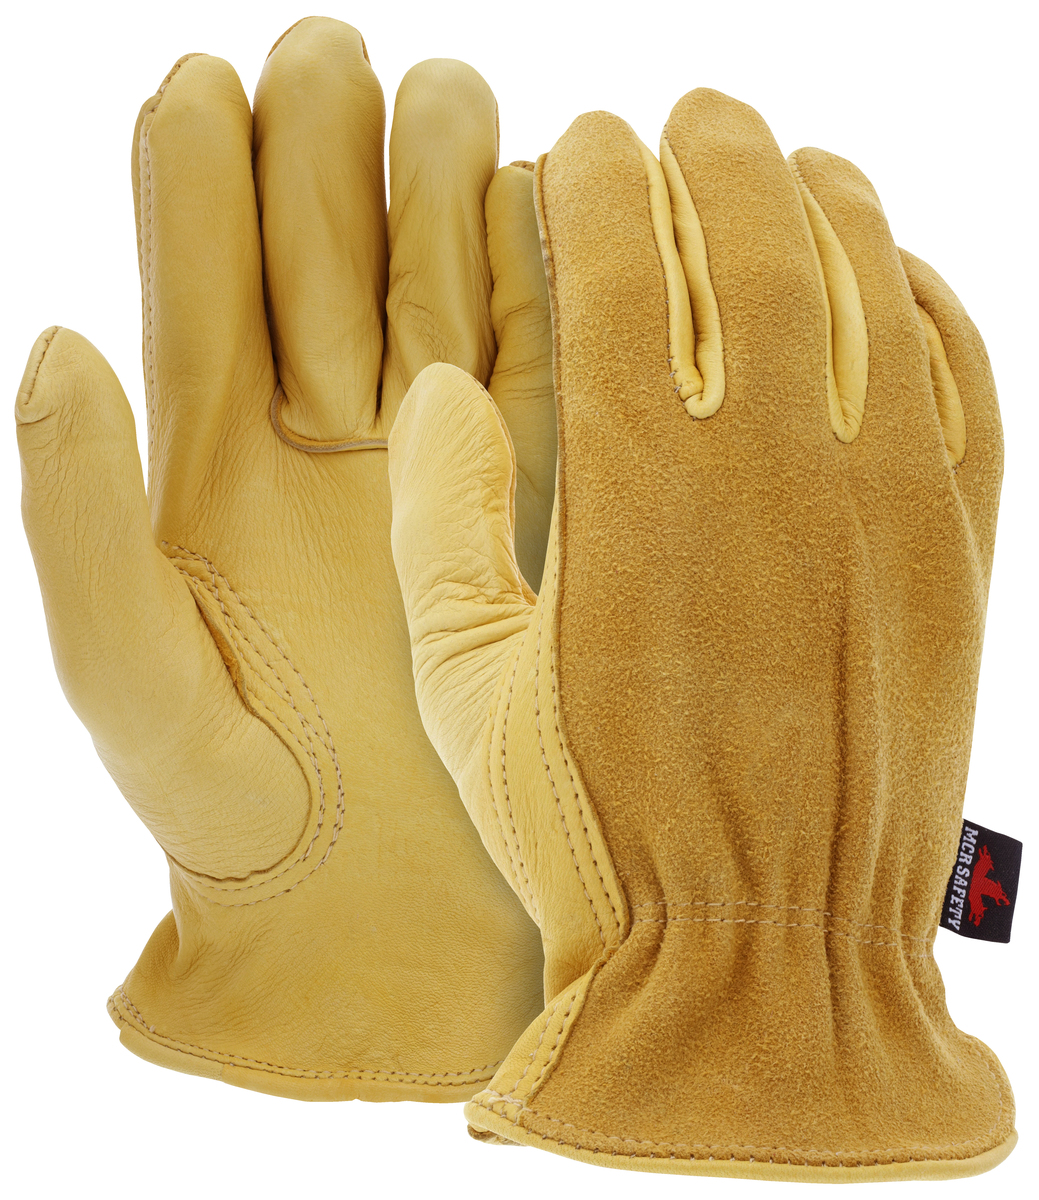 Deerskin Leather Drivers Gloves - Spill Control